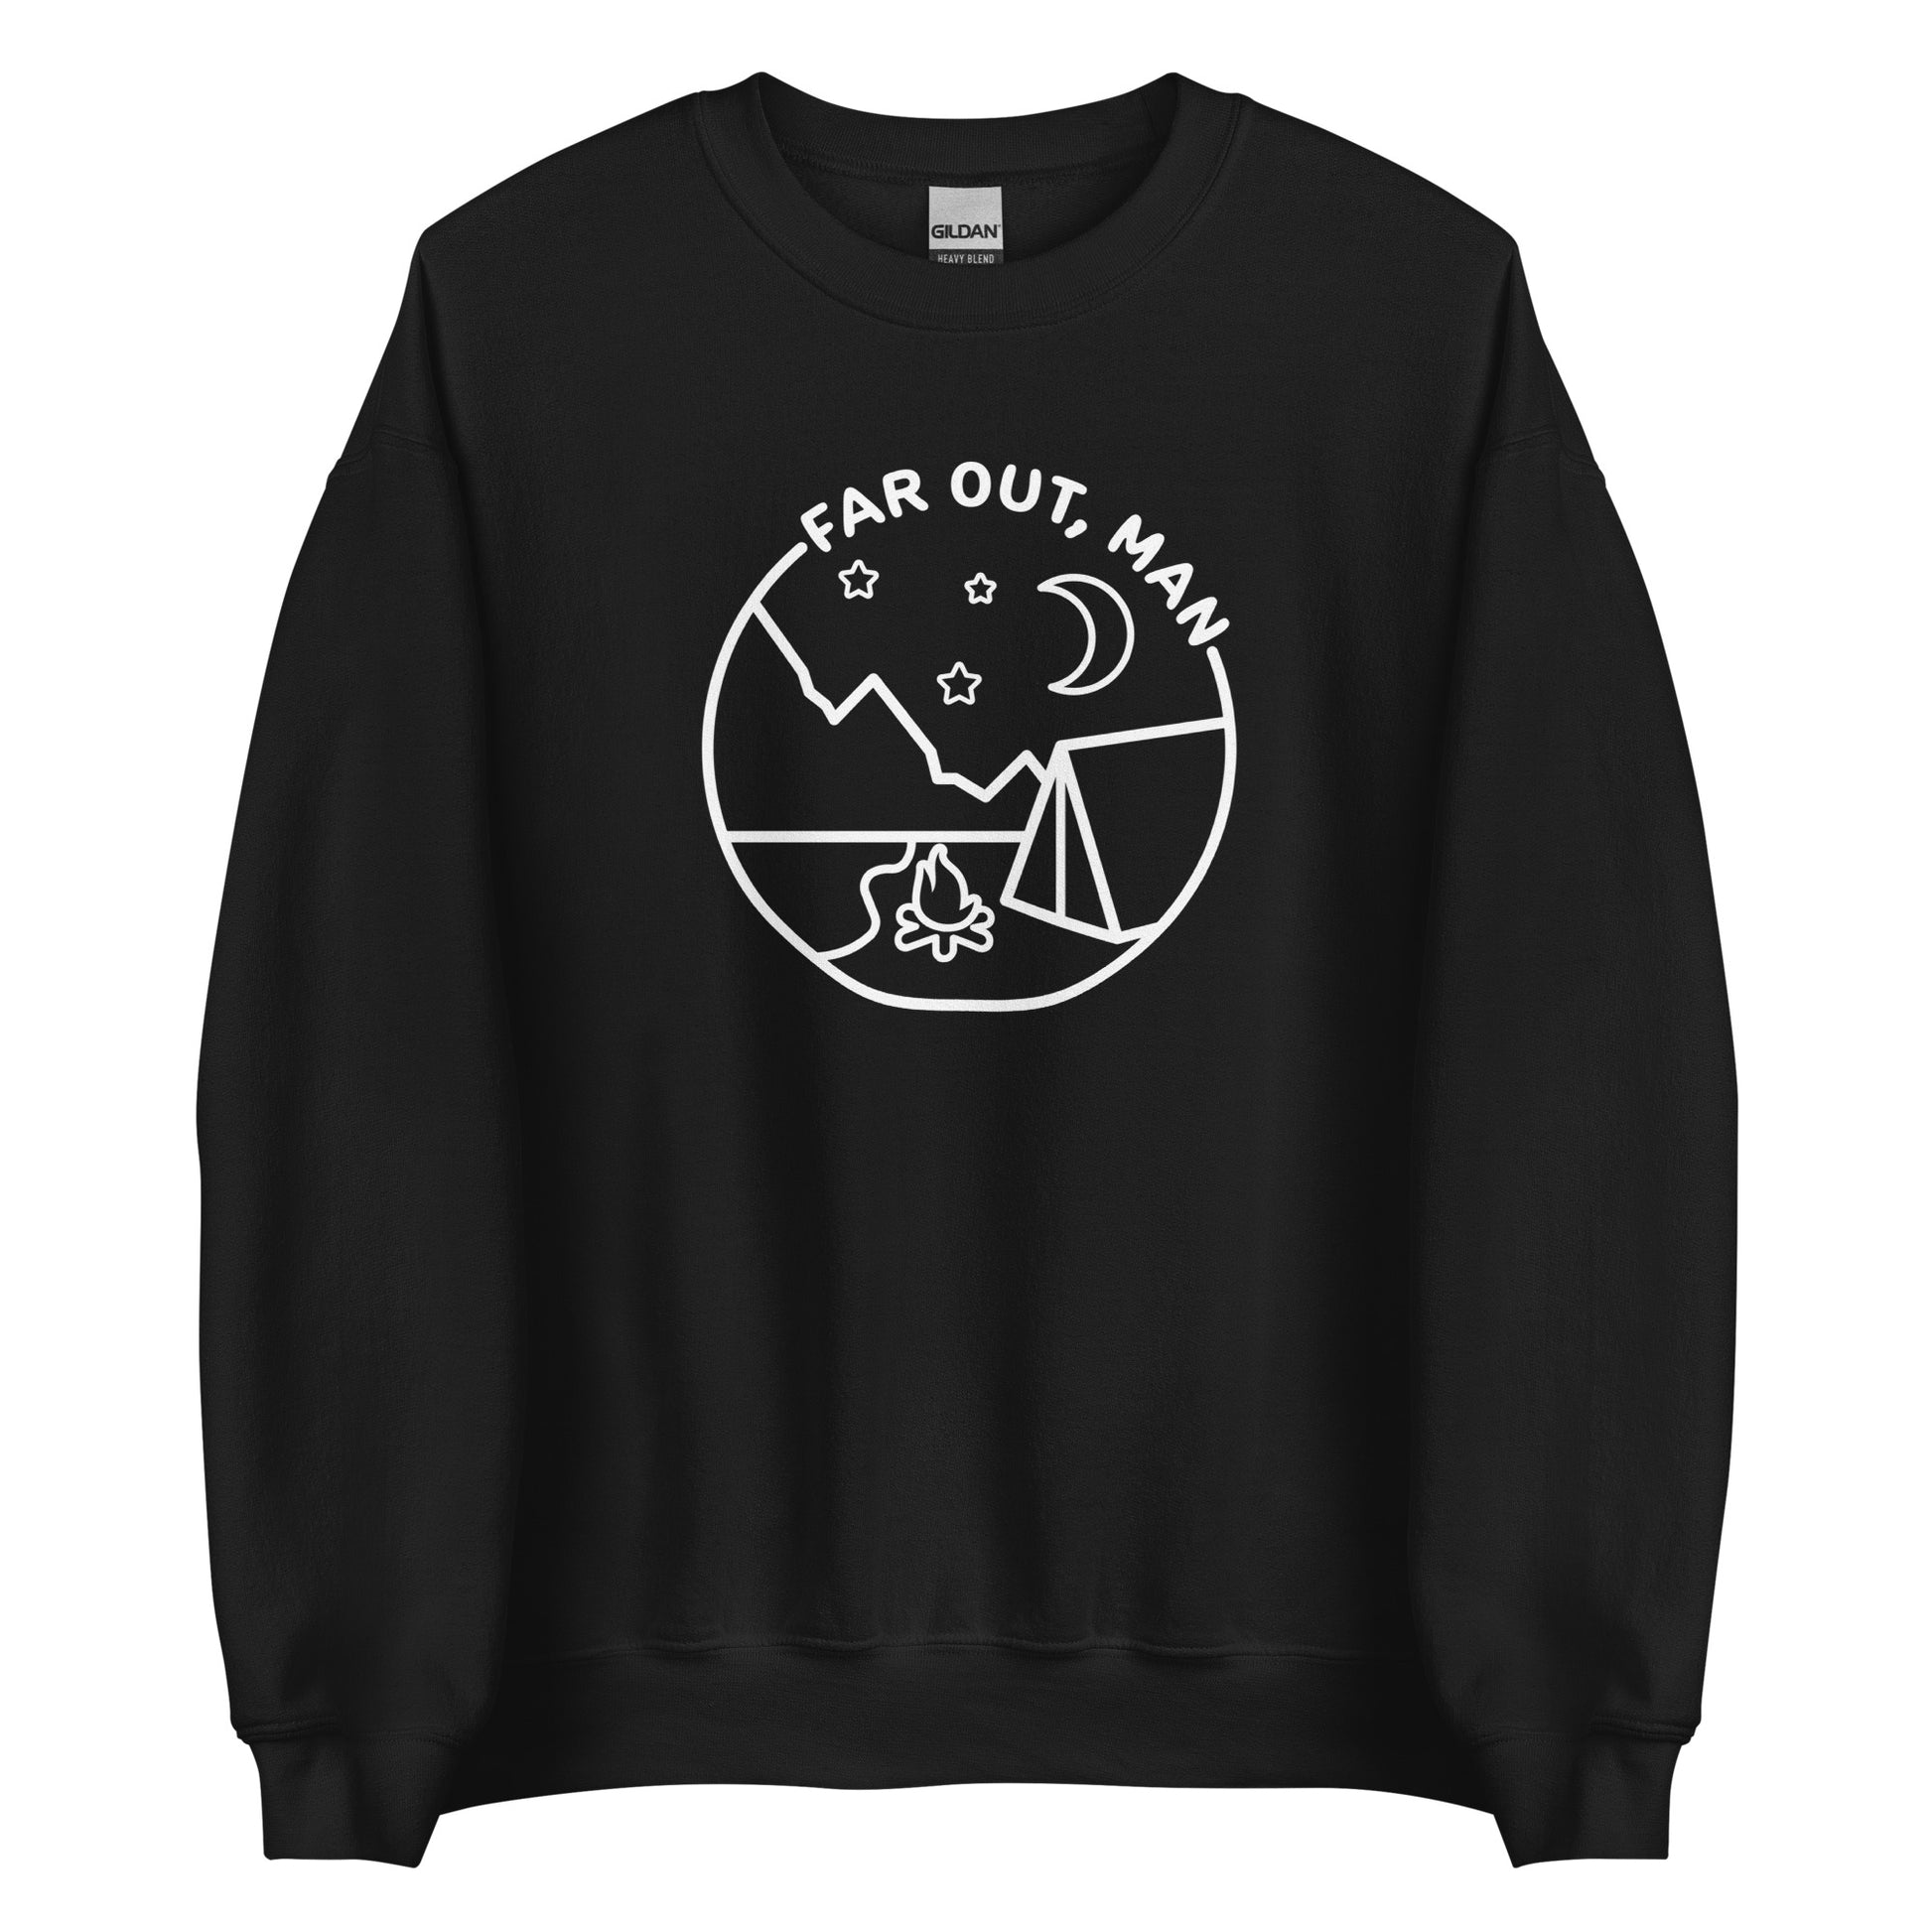 A black crewneck sweatshirt featuring a white lineart illustration of a tent and campfire under a night sky. Text in an arc above the illustration reads "Far out, man"